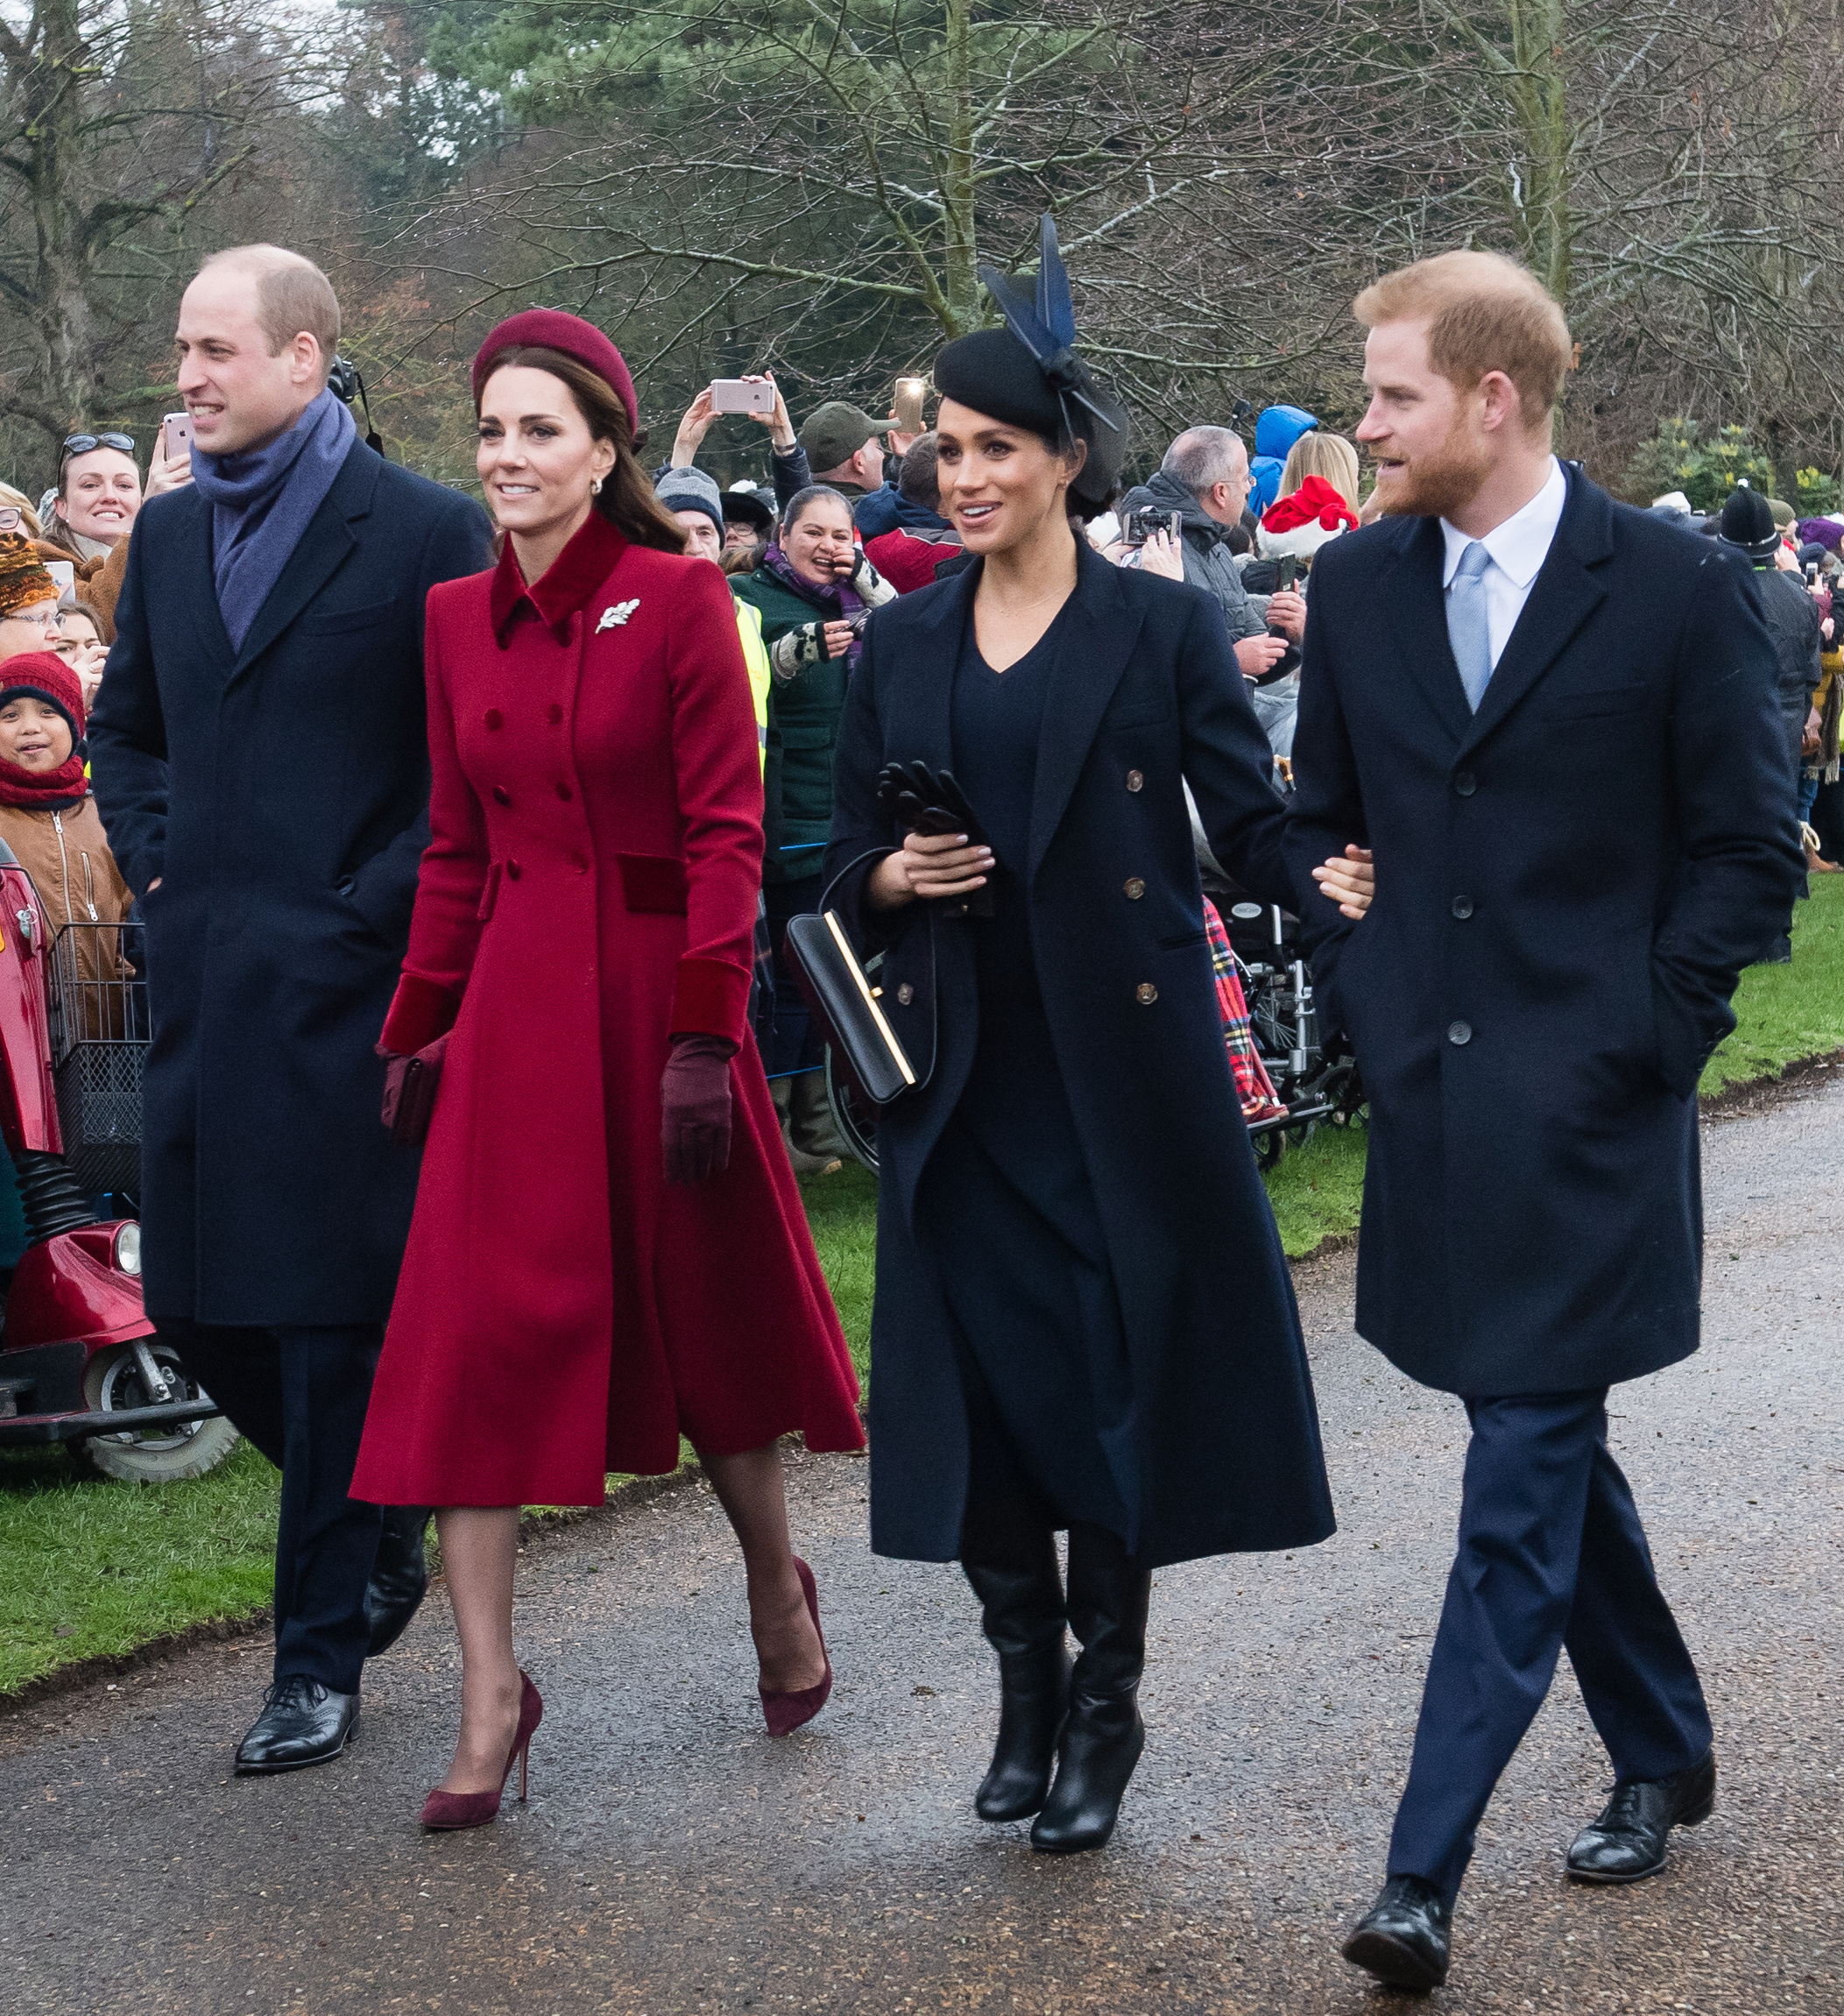 PHOTO: Prince William, Duke of Cambridge, Catherine, Duchess of Cambridge, Meghan, Duchess of Sussex and Prince Harry, Duke of Sussex attend Christmas Day Church service at Church of St Mary Magdalene, Dec. 25, 2018, in King's Lynn, England.